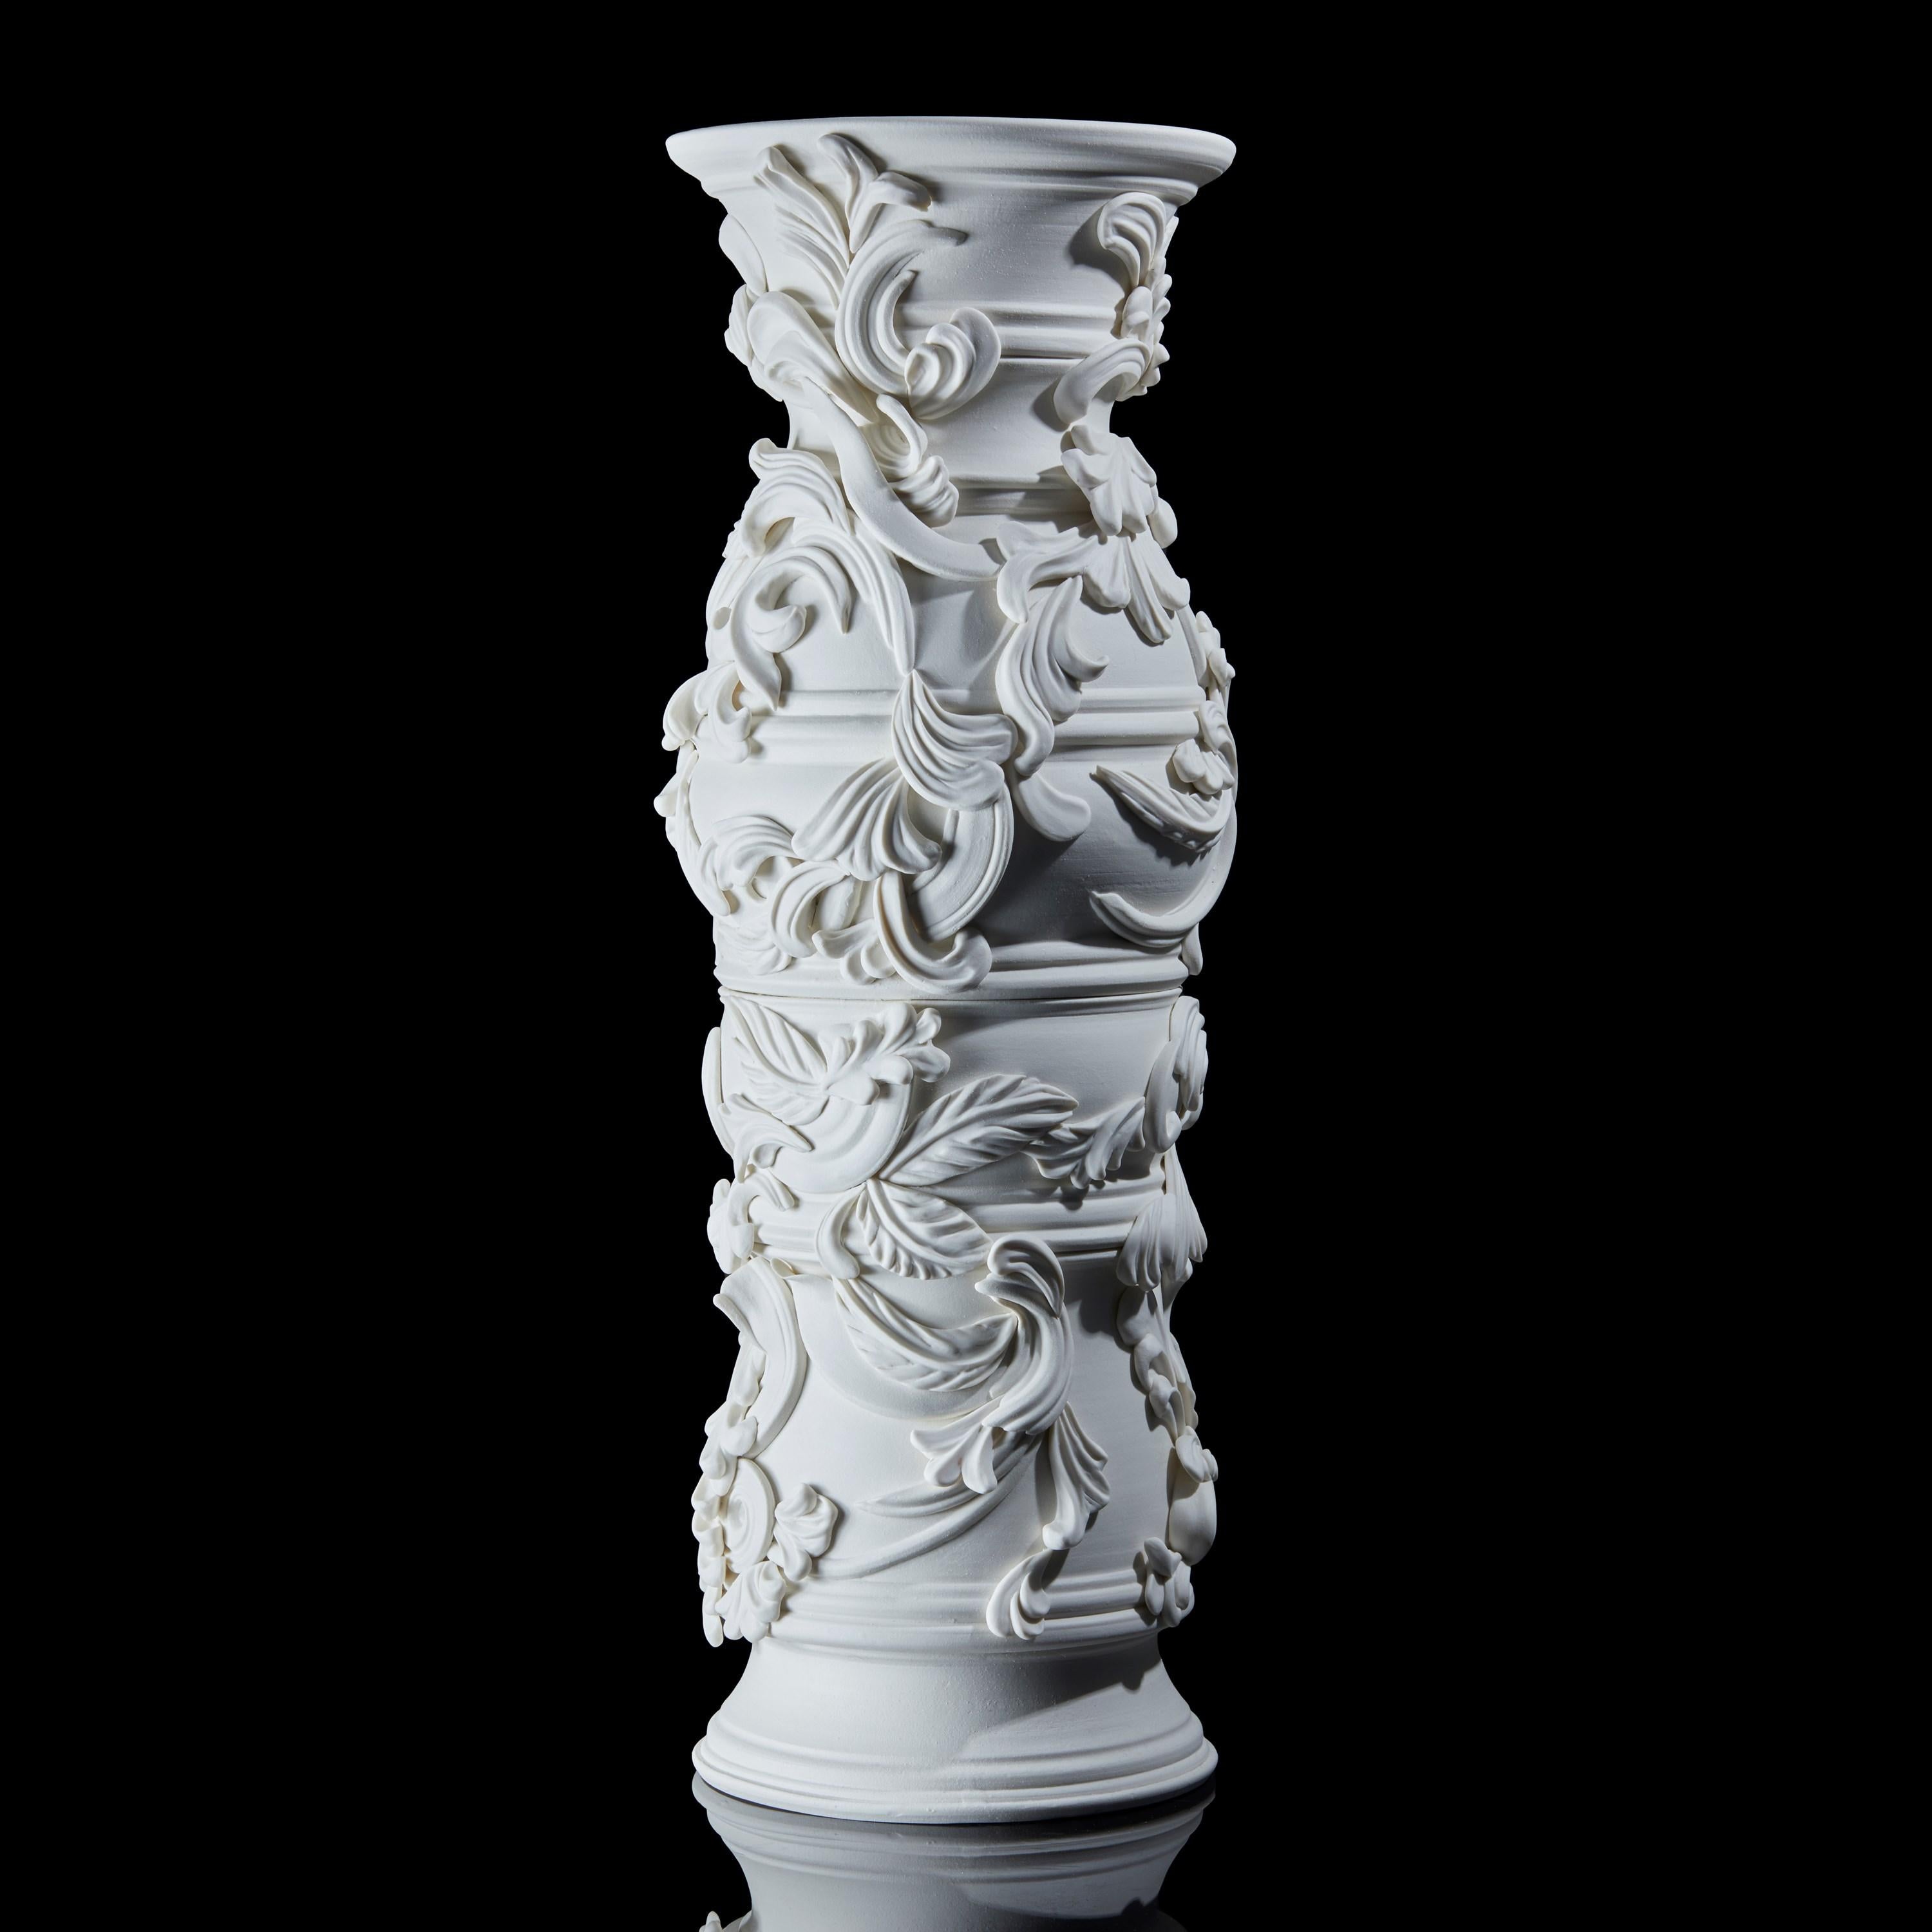 Hand-Crafted Promenade II, a Unique Ceramic Sculptural Tall Vase in Porcelain by Jo Taylor